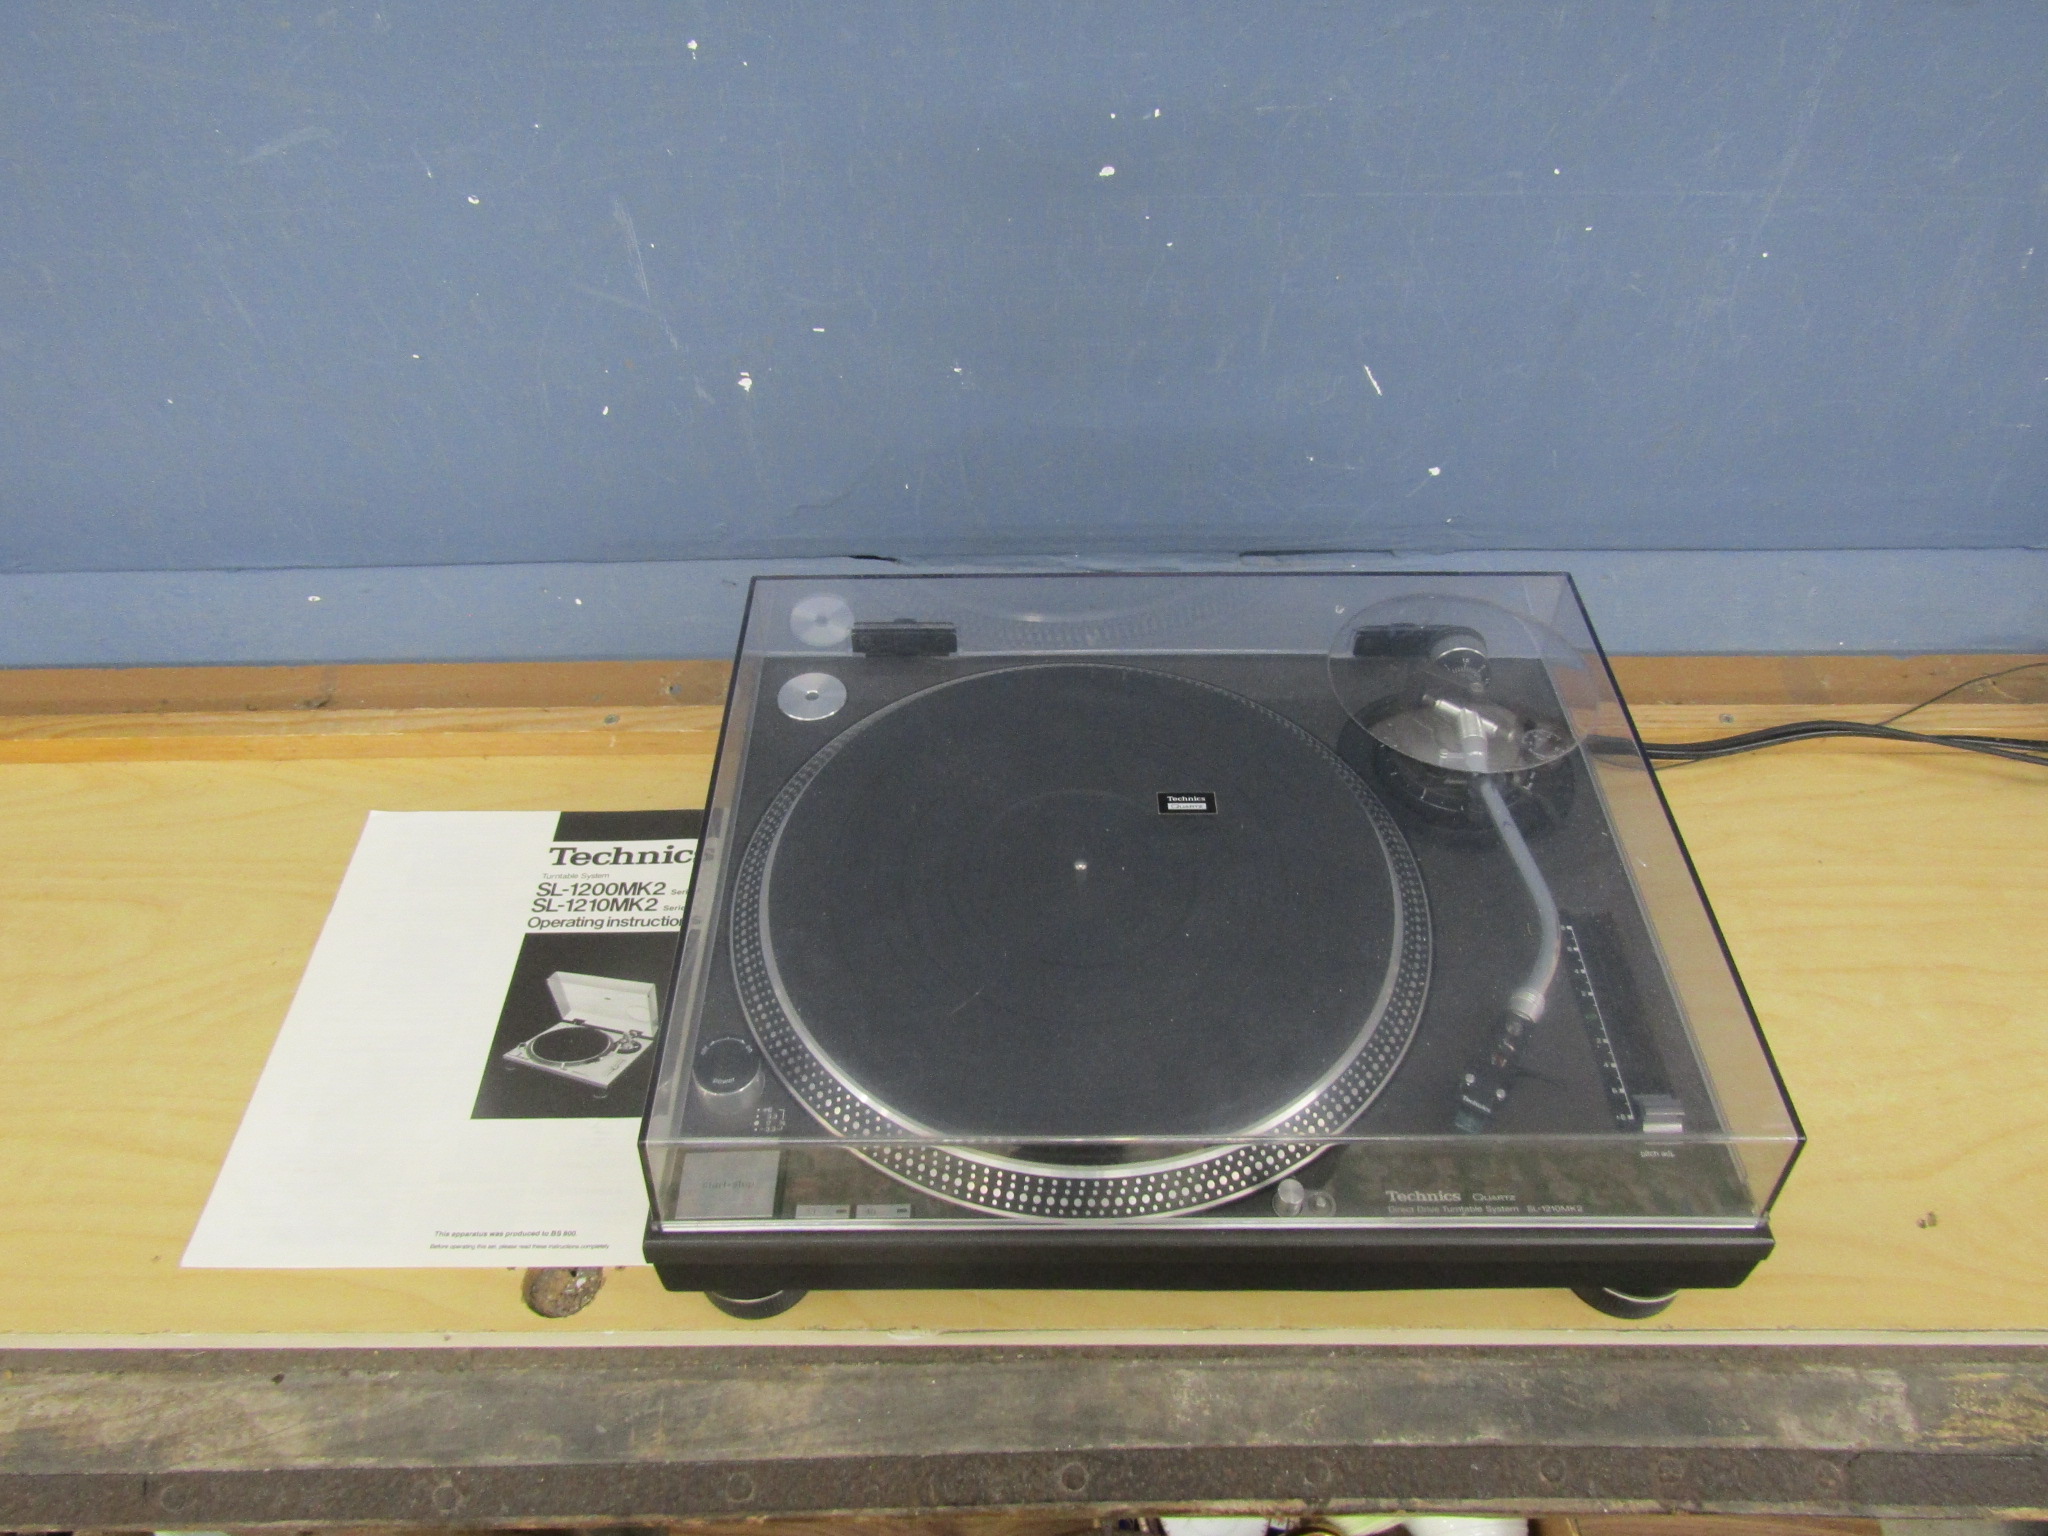 Technics Quartz SL-1210 MK2 direct drive turntable system with manual from a house clearance - Image 8 of 8